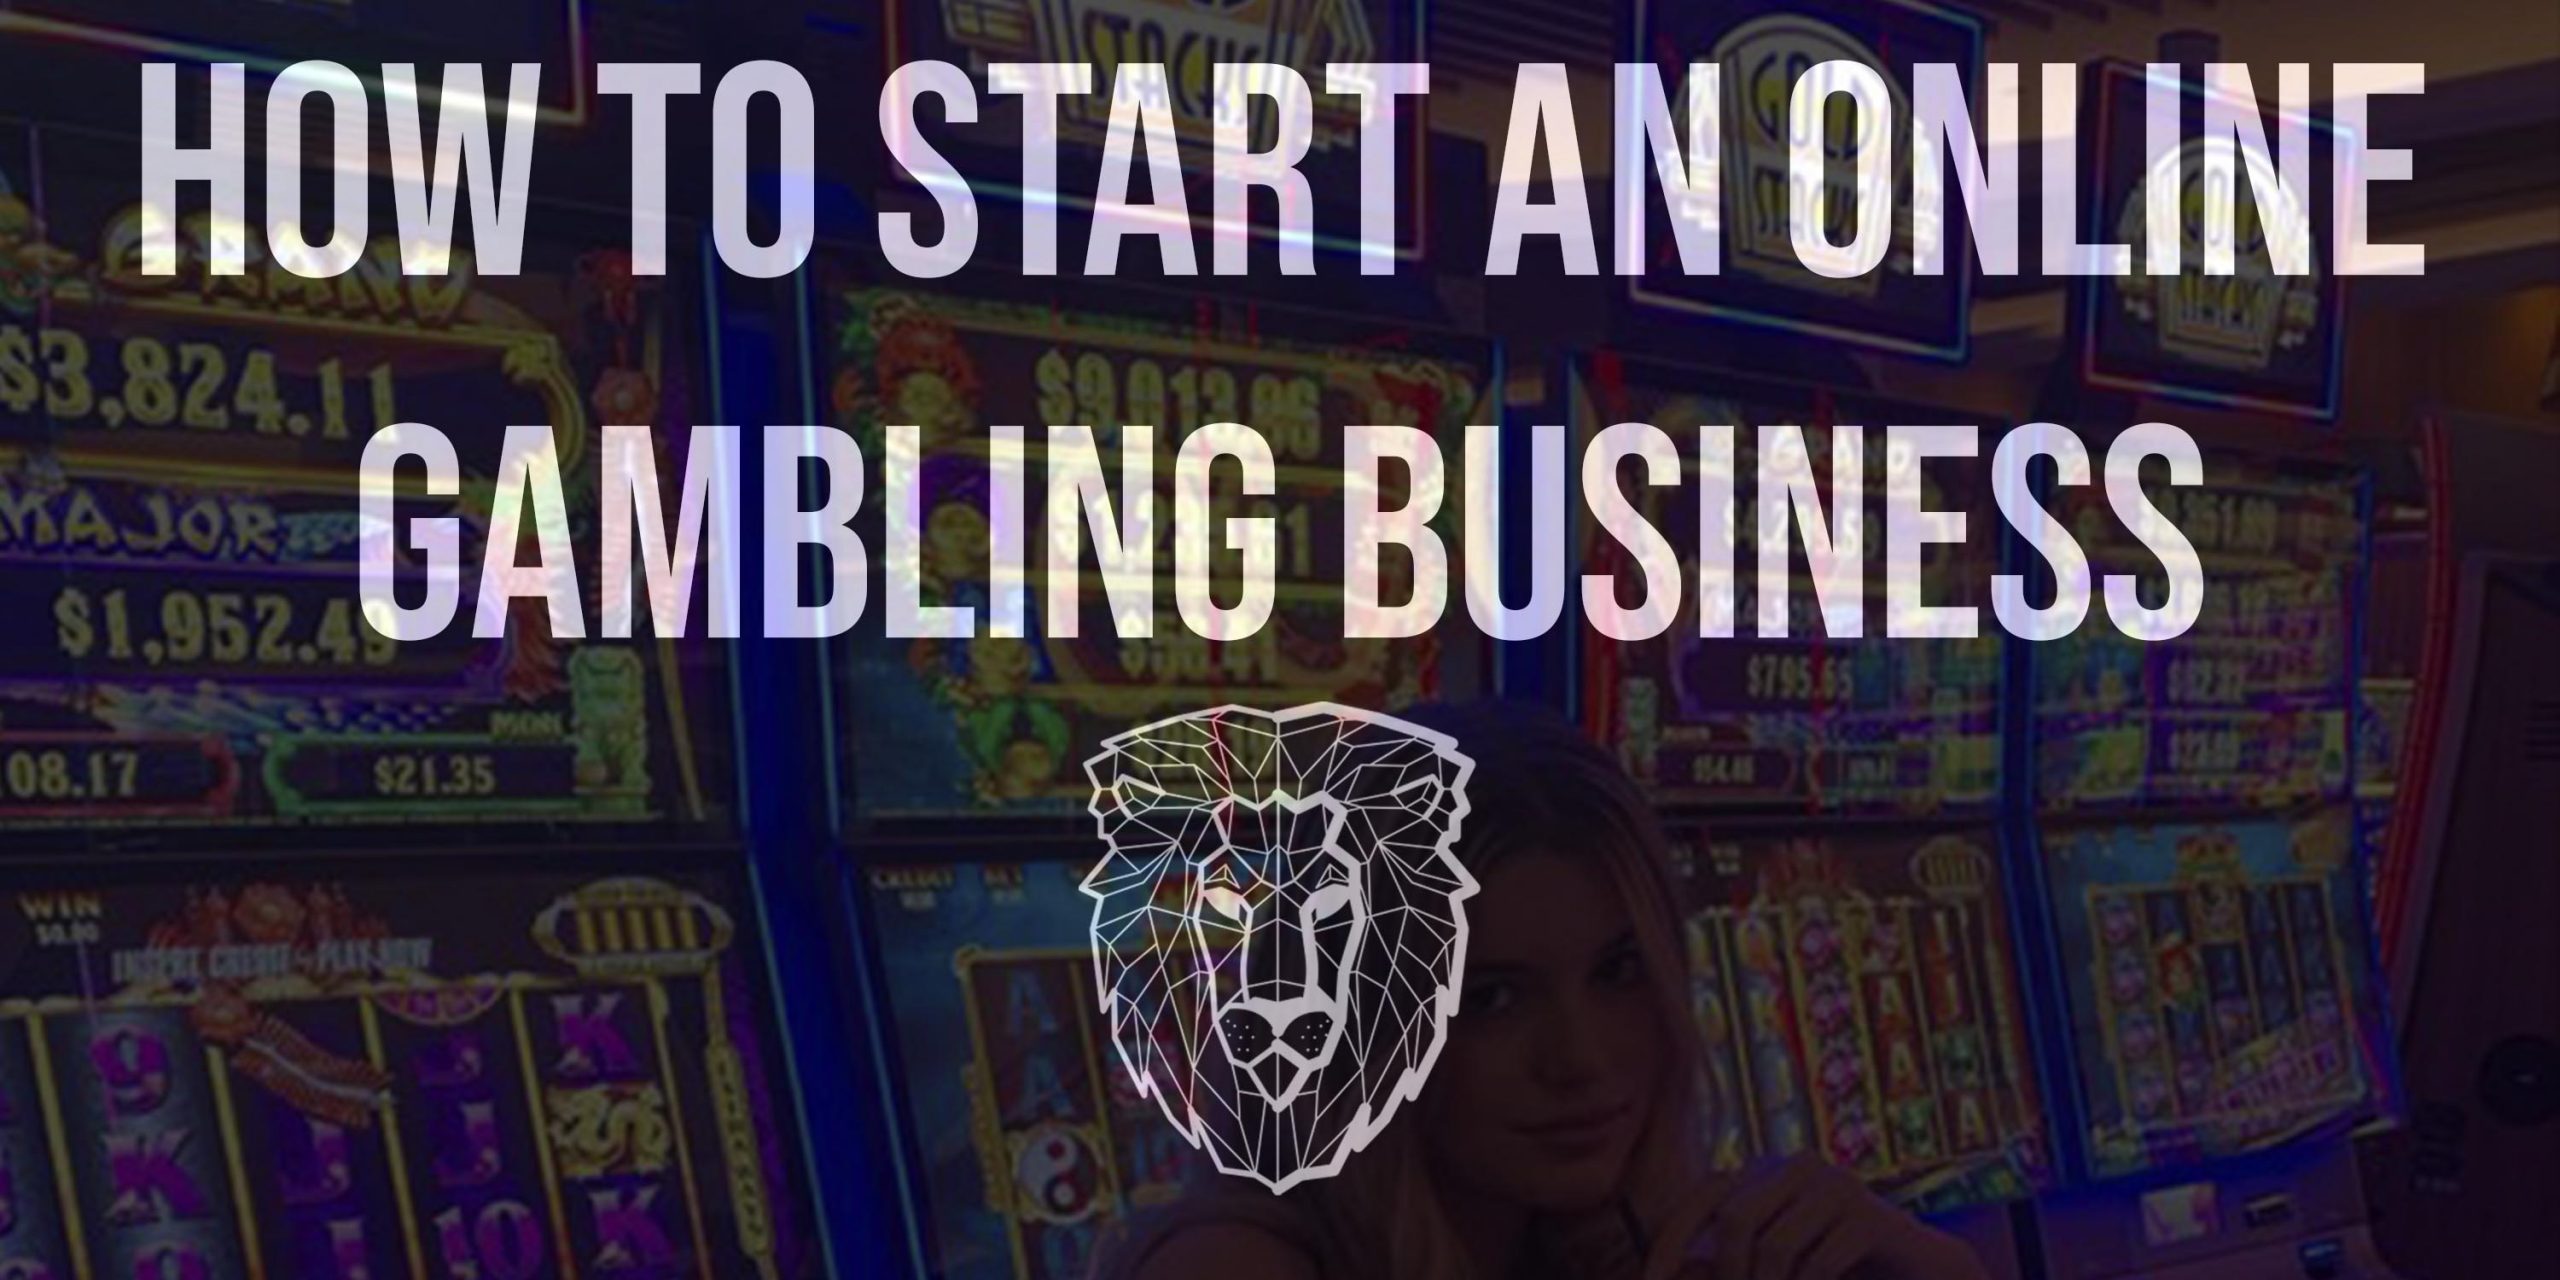 how to start an online gambling business, how do online casino works, bookmaking